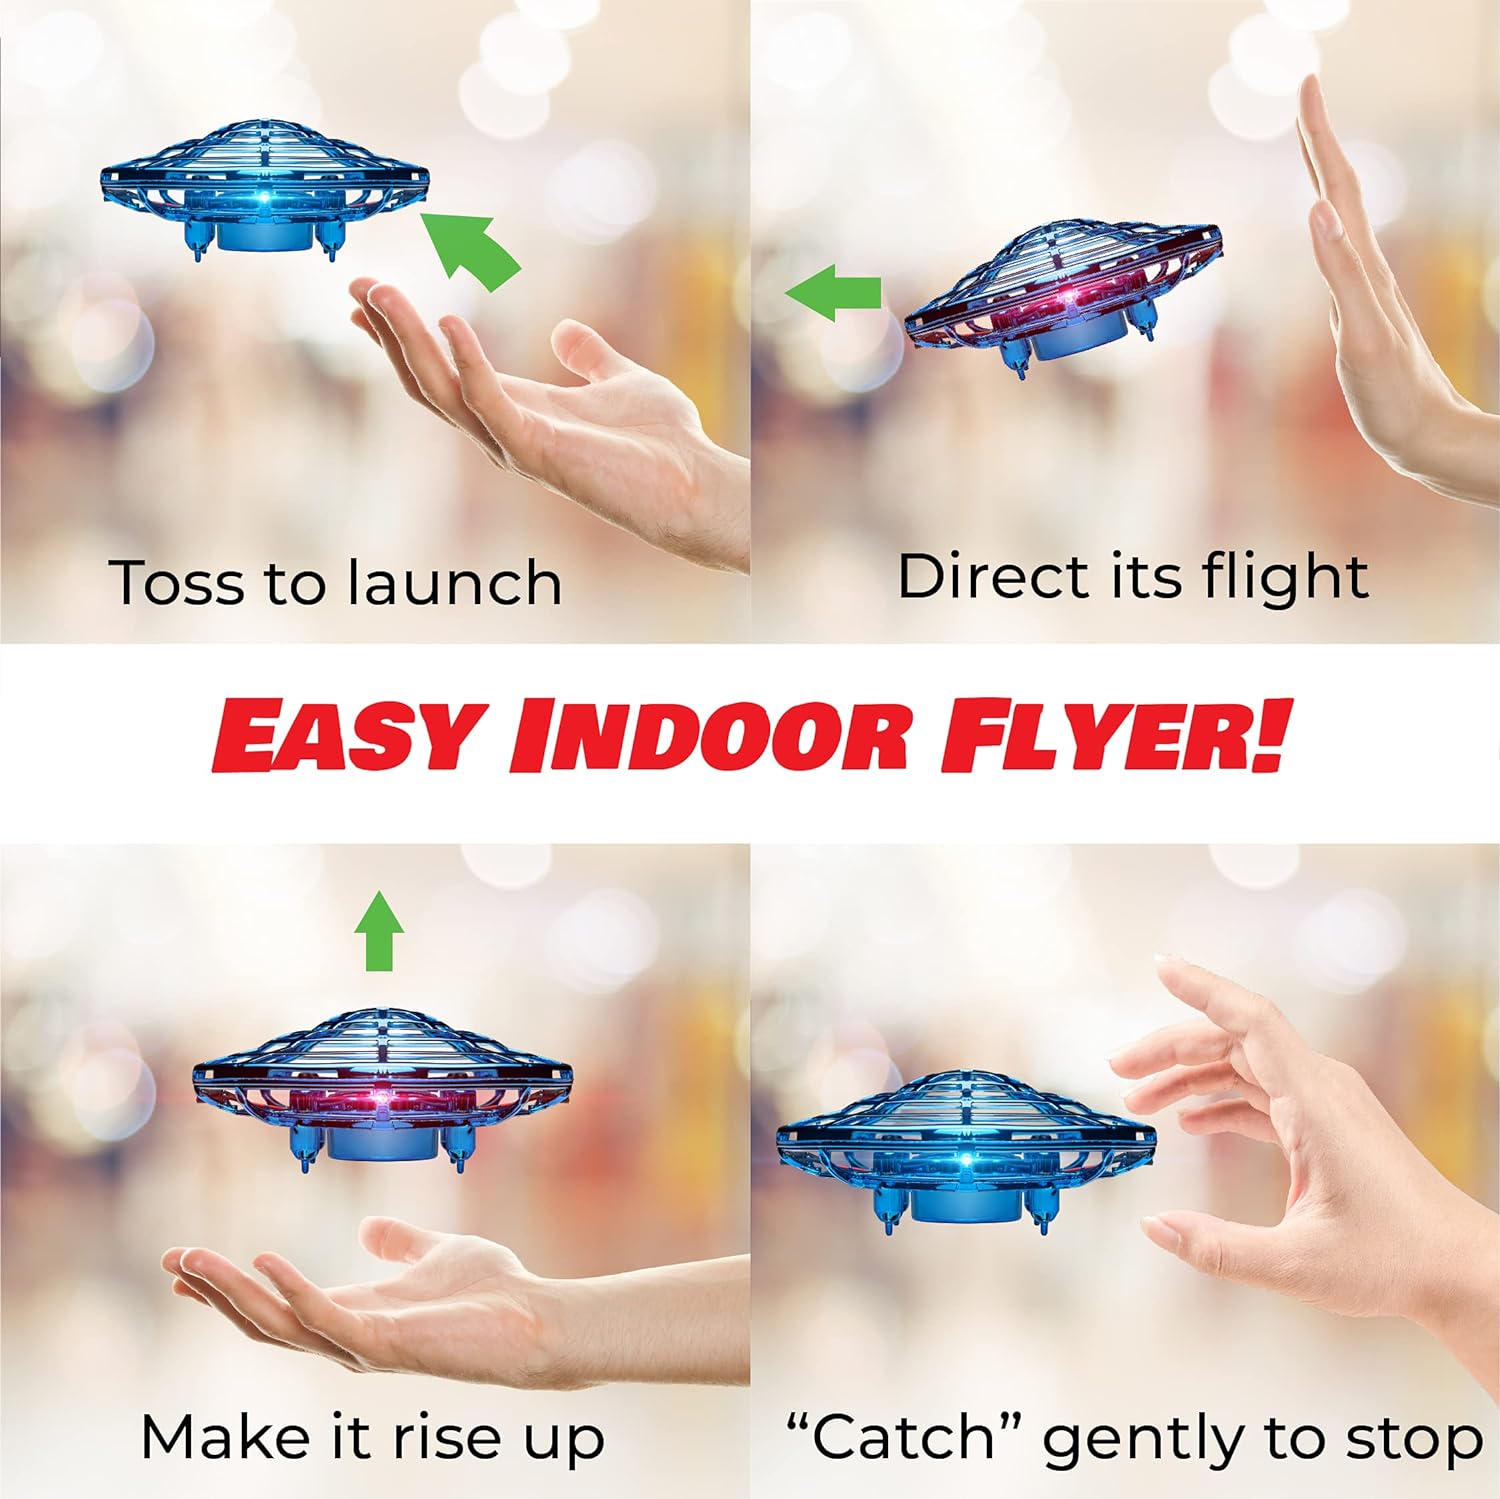 Force1 Scoot Hand Operated Drone for Kids or Adults - Hands Free Motion Sensor Mini Drone, Indoor Small UFO Toy Flying Ball Drone (Blue)